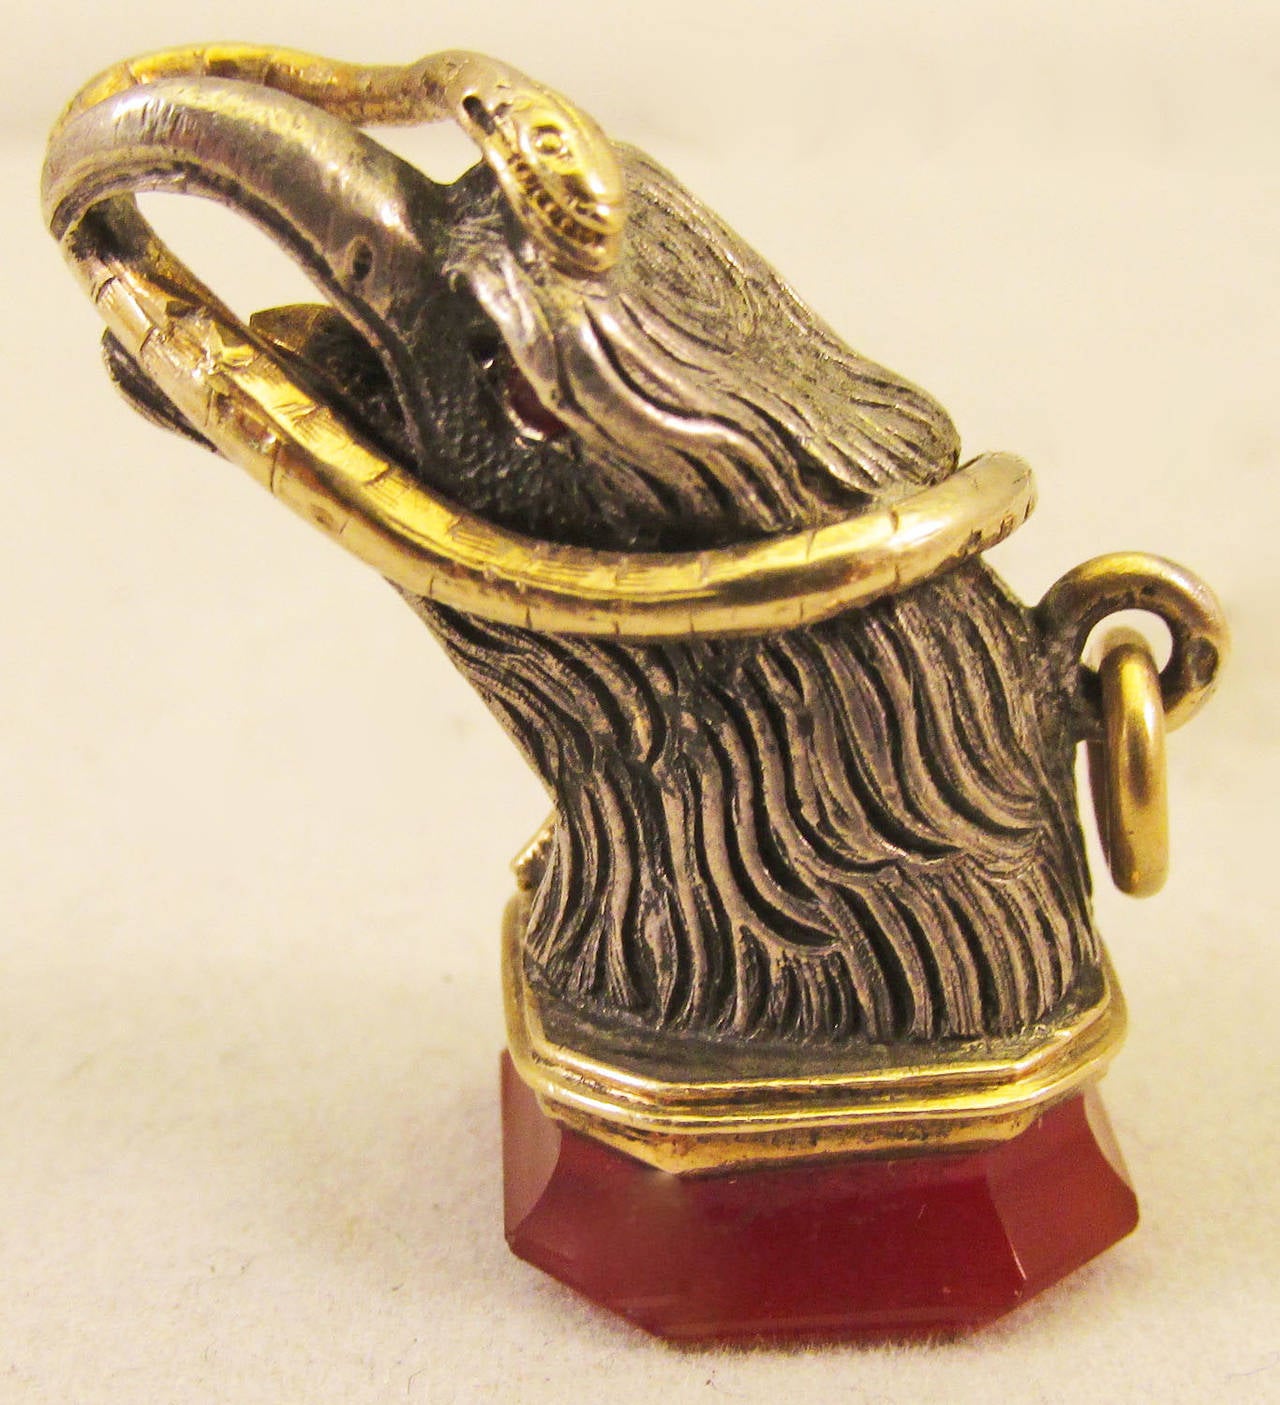 Dramatic Georgian fob of a silver eagle's head with garnet eyes carrying a gold snake resting on a carnelian seal. Perfect on a watch chain or a necklace or a charm bracelet. The fob measures 1 1/8